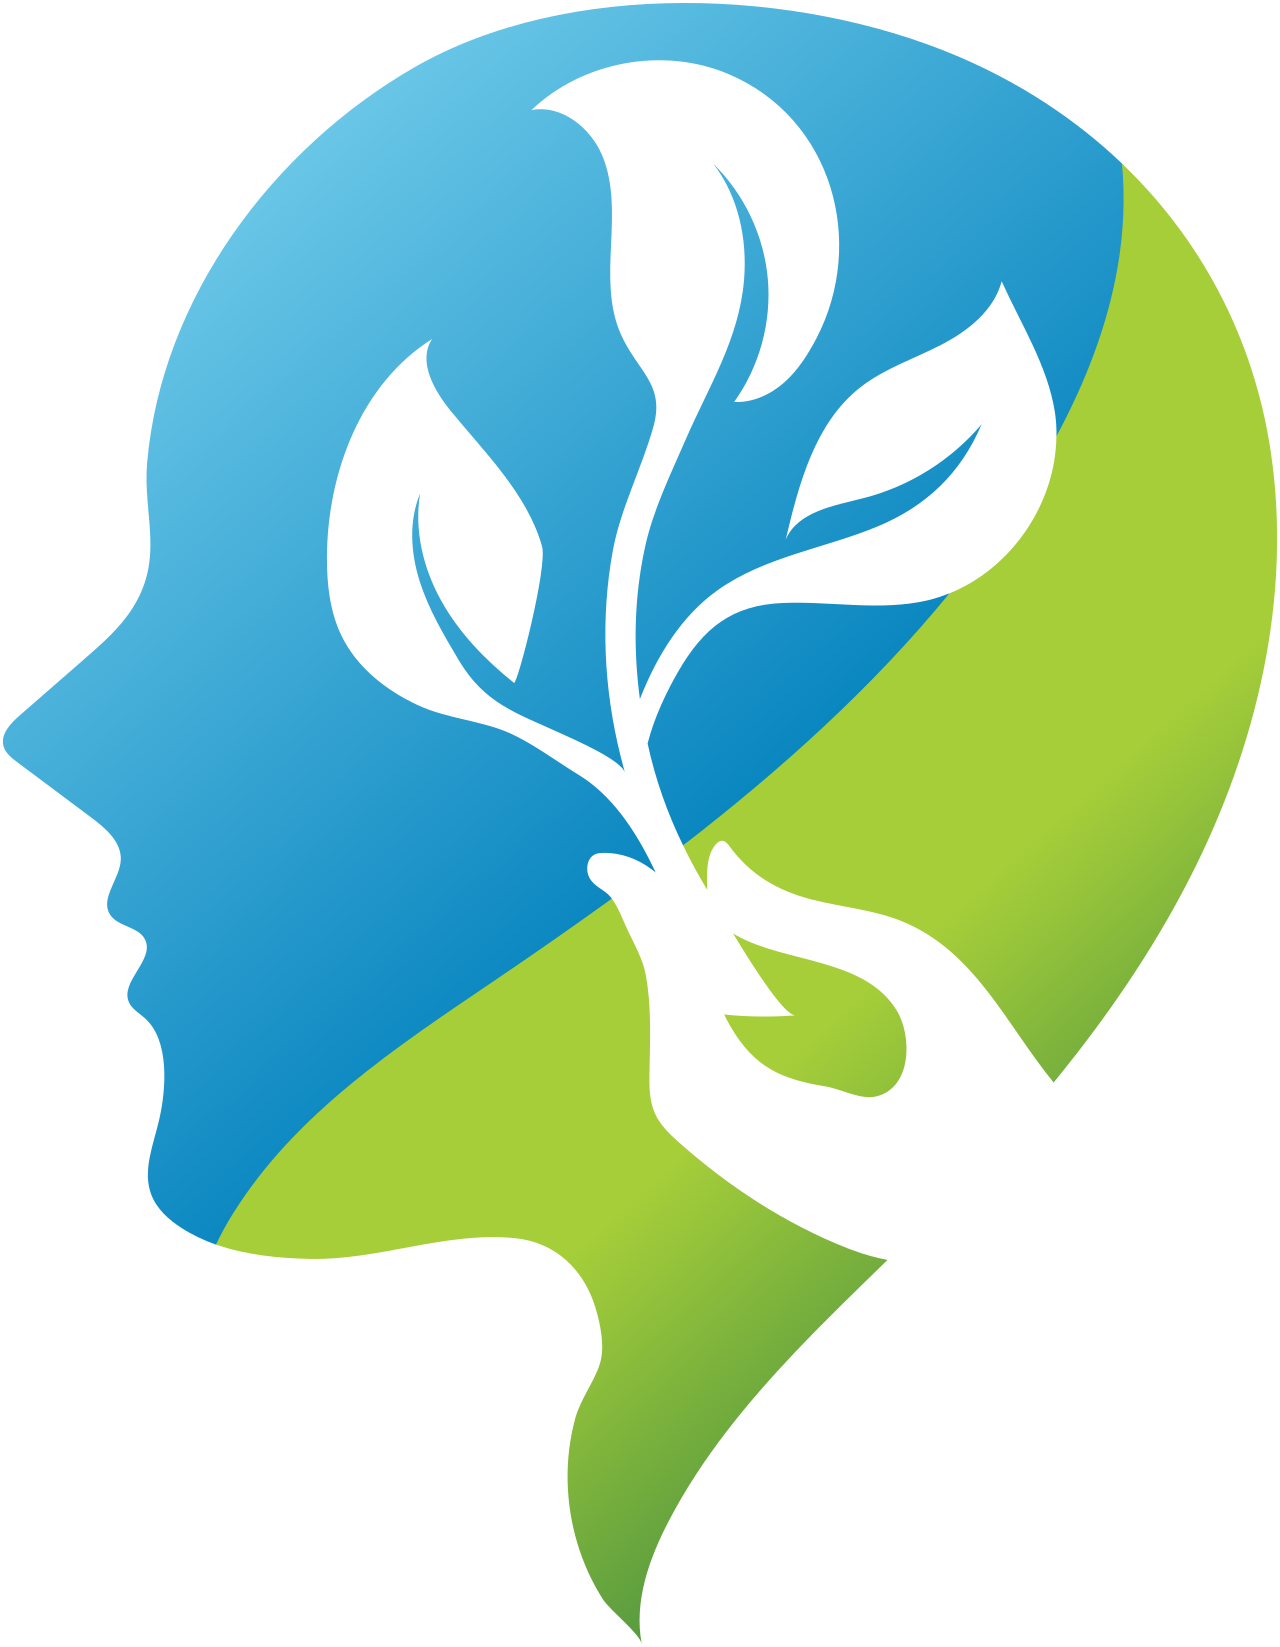 Quality Mental Health Counseling 's logo